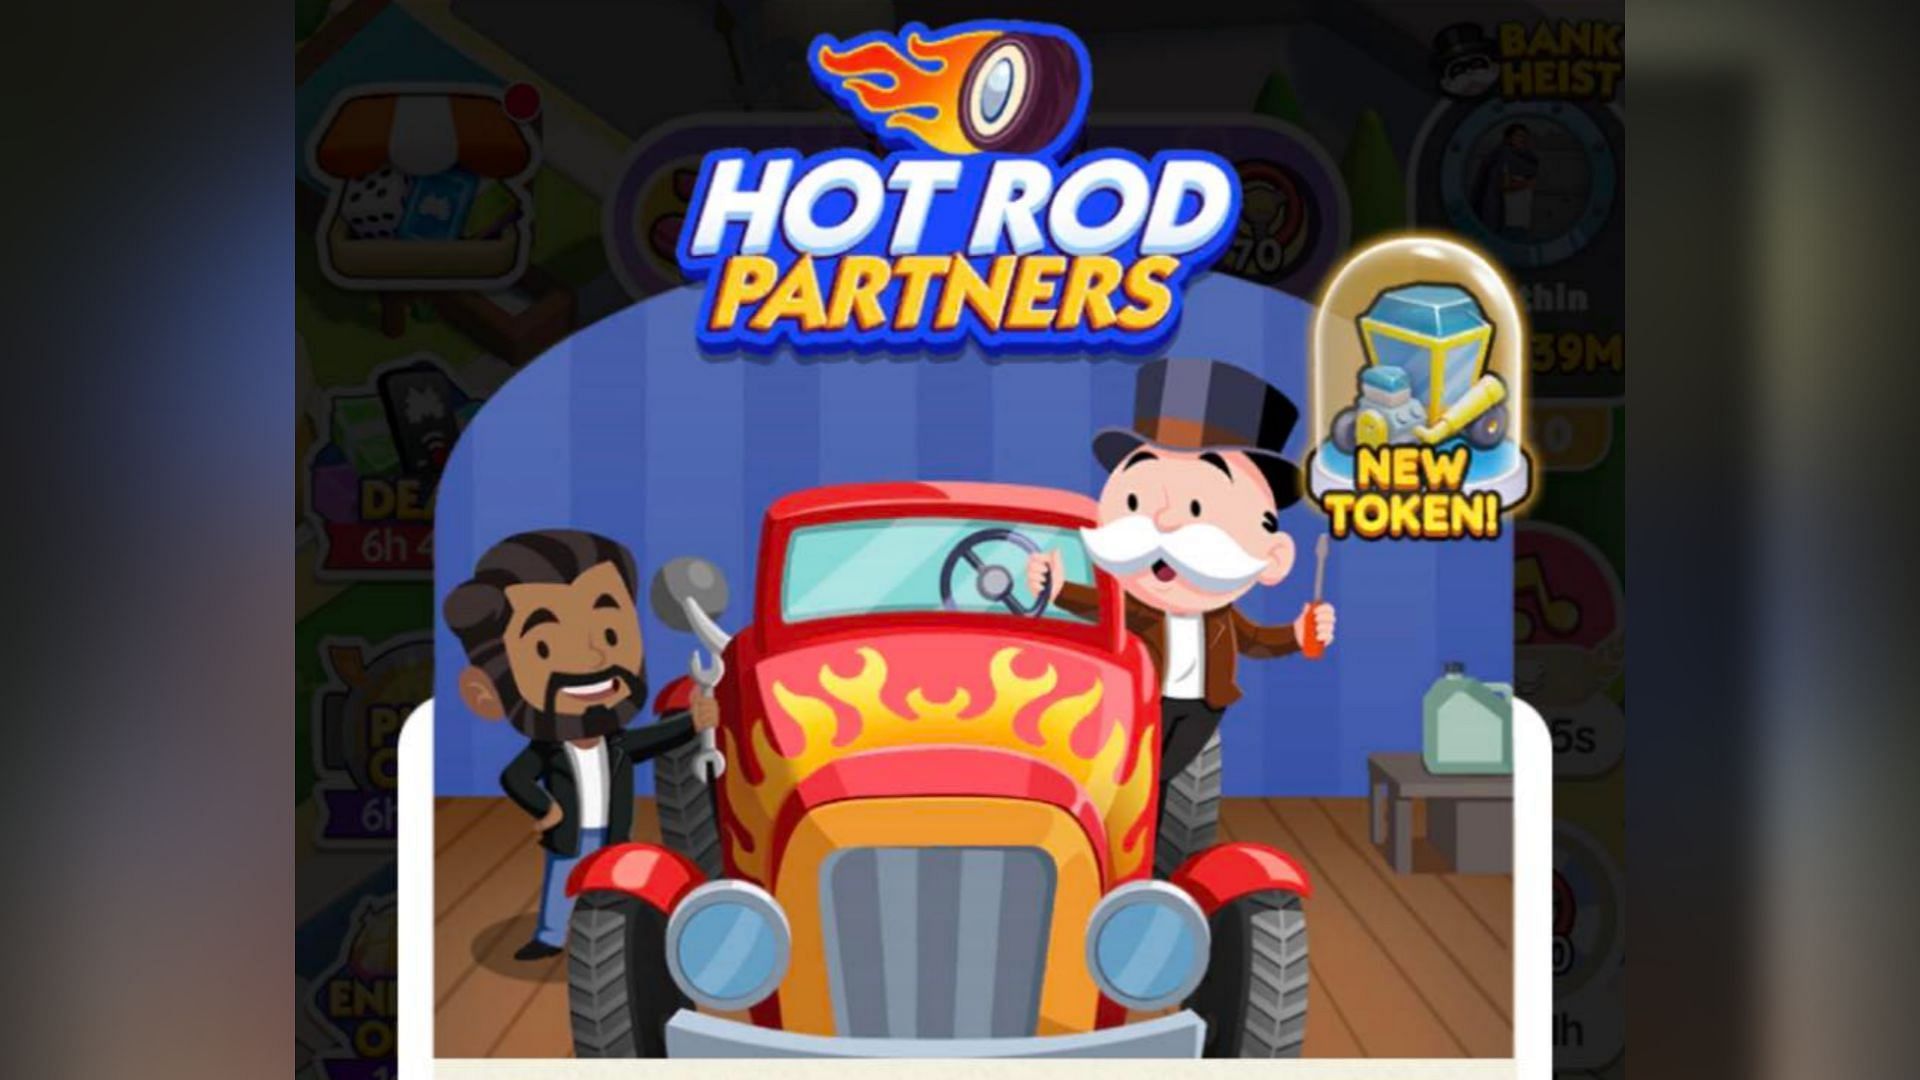 Monopoly Go Hot Rod Partners event can now played now